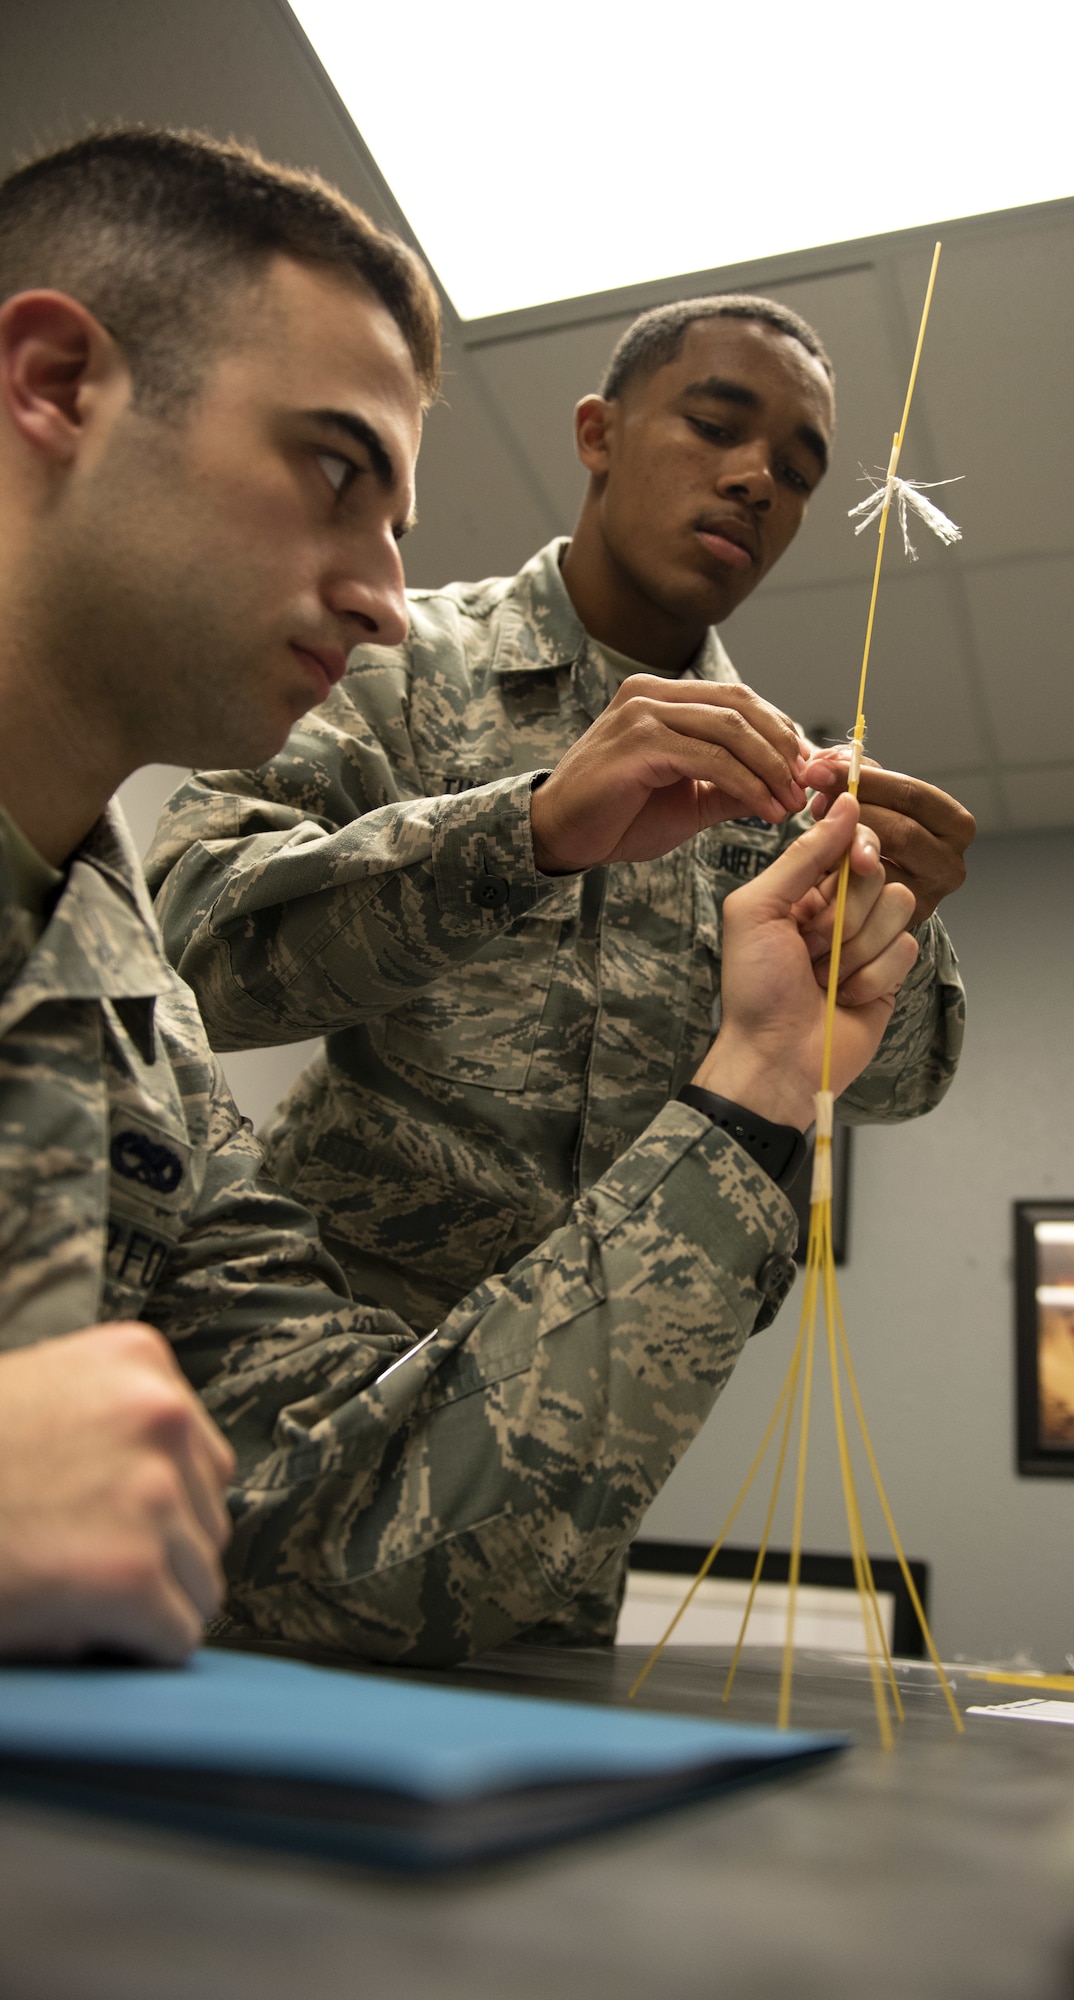 Airman 1st Class Resean Thomas, 60th Aircraft Maintenance Squadron C5 communications navigation apprentice, right, works with Airman 1st Class Mike Sobeck, 60th MXS C5 crewchief, during a competition with the First Term Airman Course class Jan. 10, 2019, at Travis Air Force Base, Calif. Airmen attend FTAC to help transition from the technical training atmosphere to the operational Air Force. (U.S. Air Force photo by Airman 1st Class Jonathon Carnell)